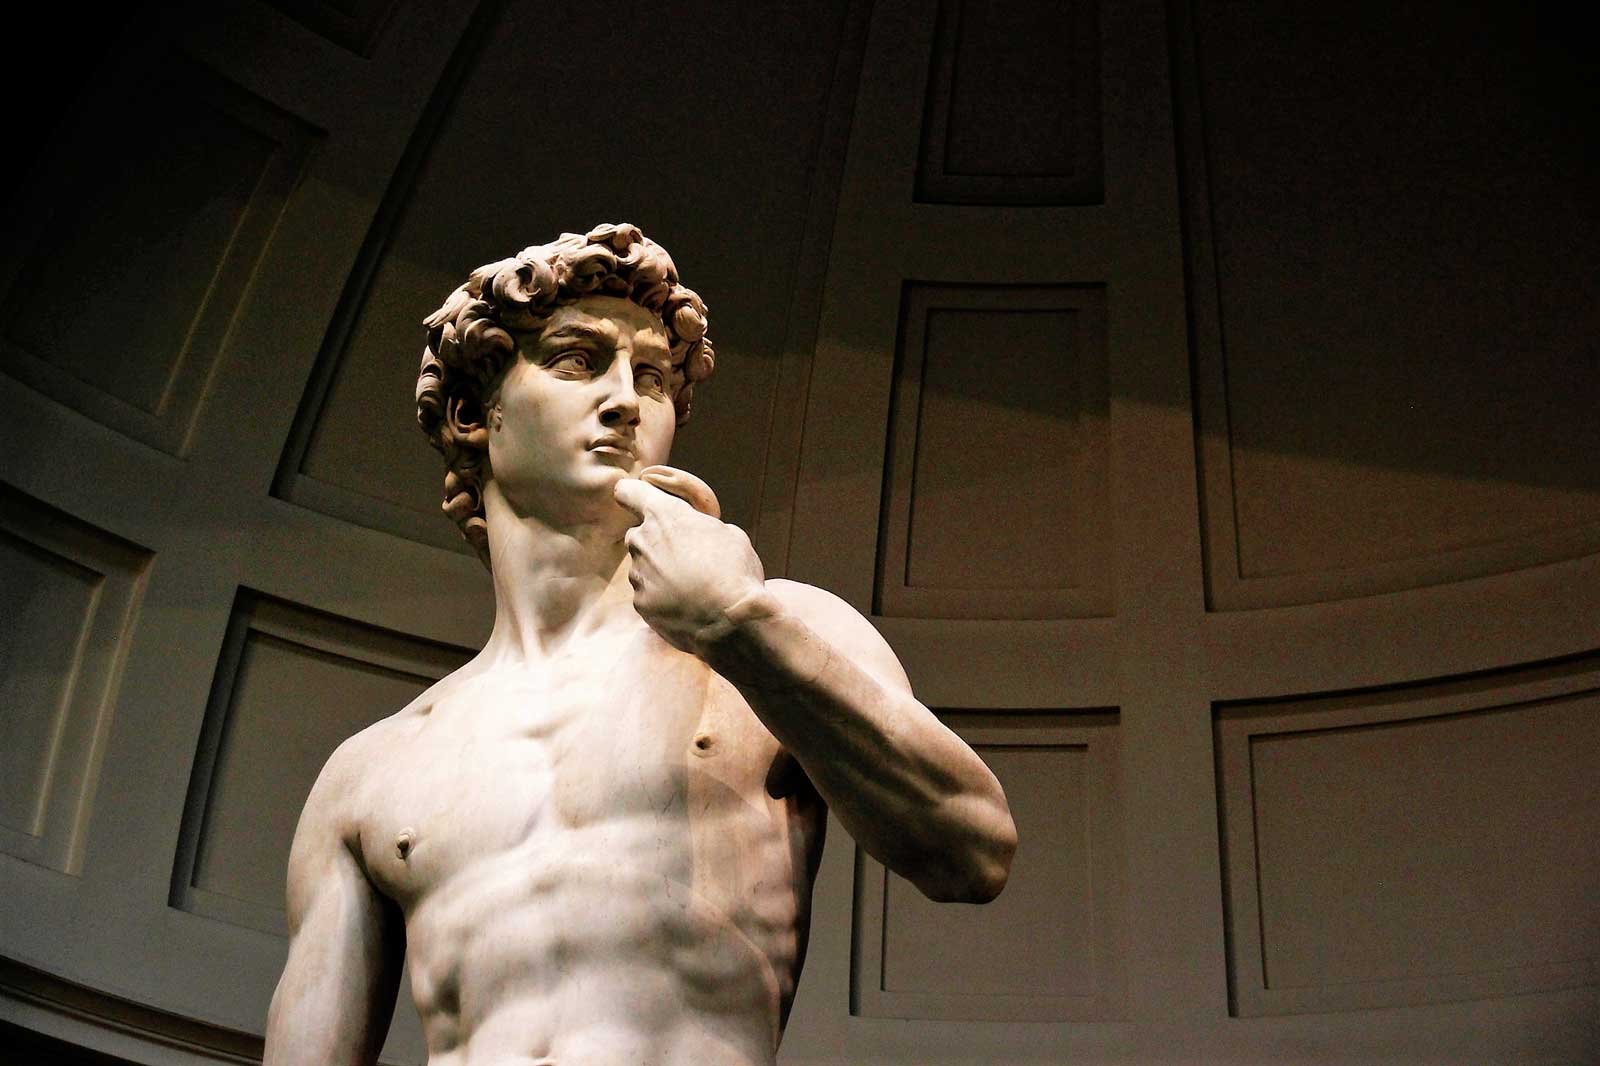 How to watch the Statue of David in Florence